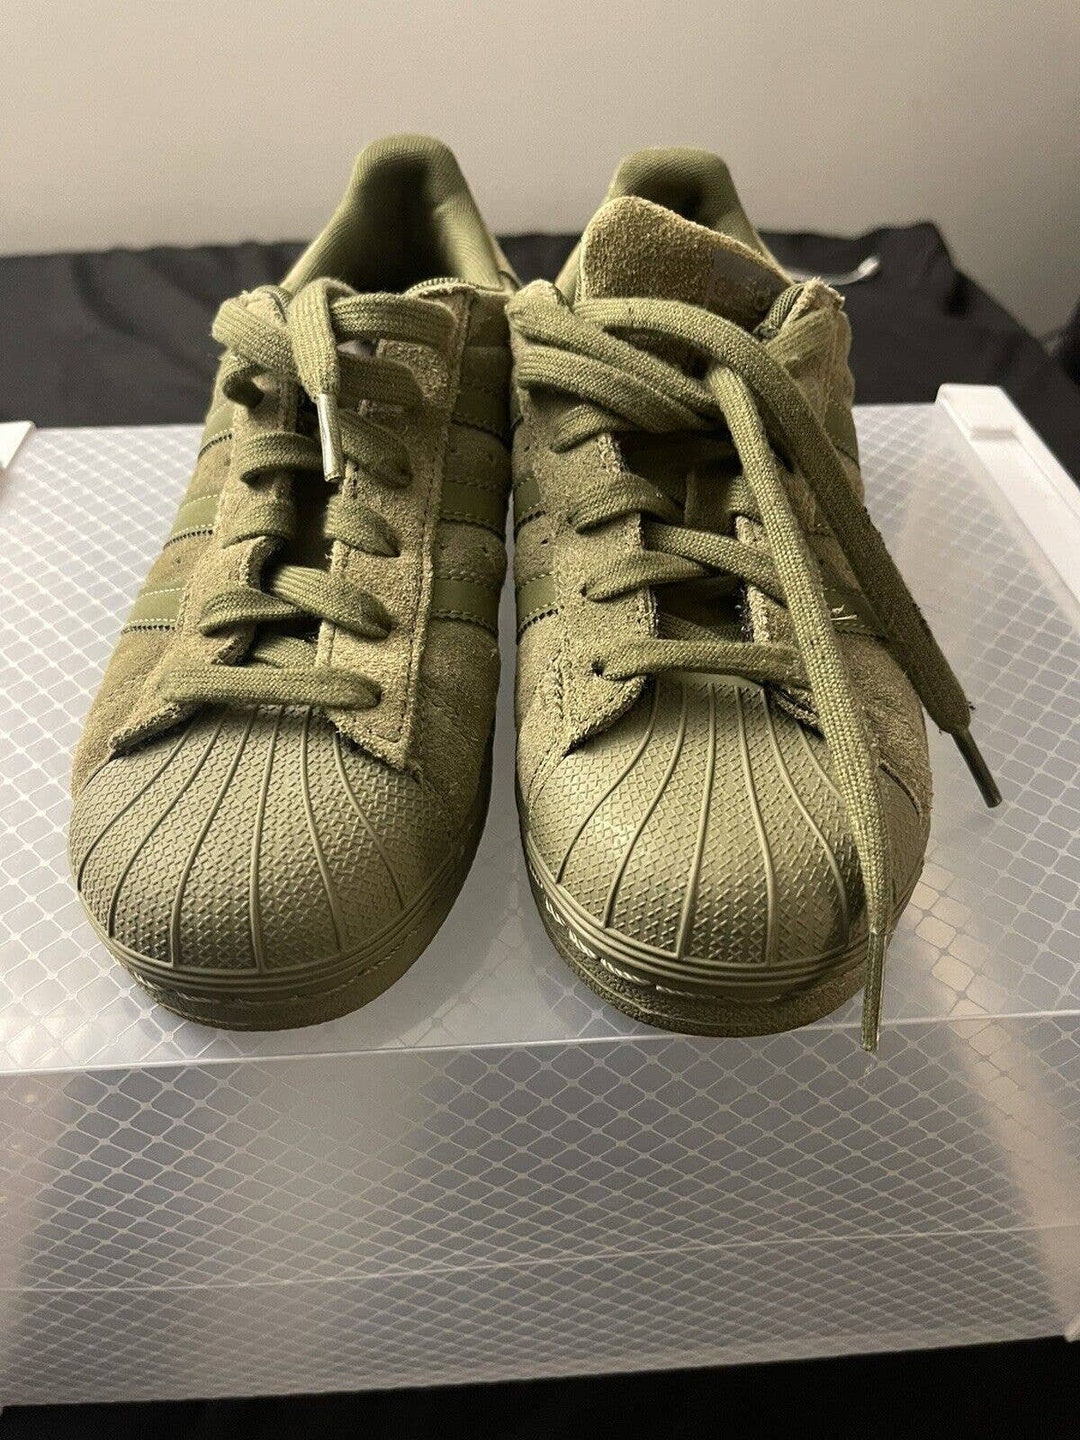 ADIDAS Superstar Olive Green Suede Shelltoe Sneakers Shoes - Etsy